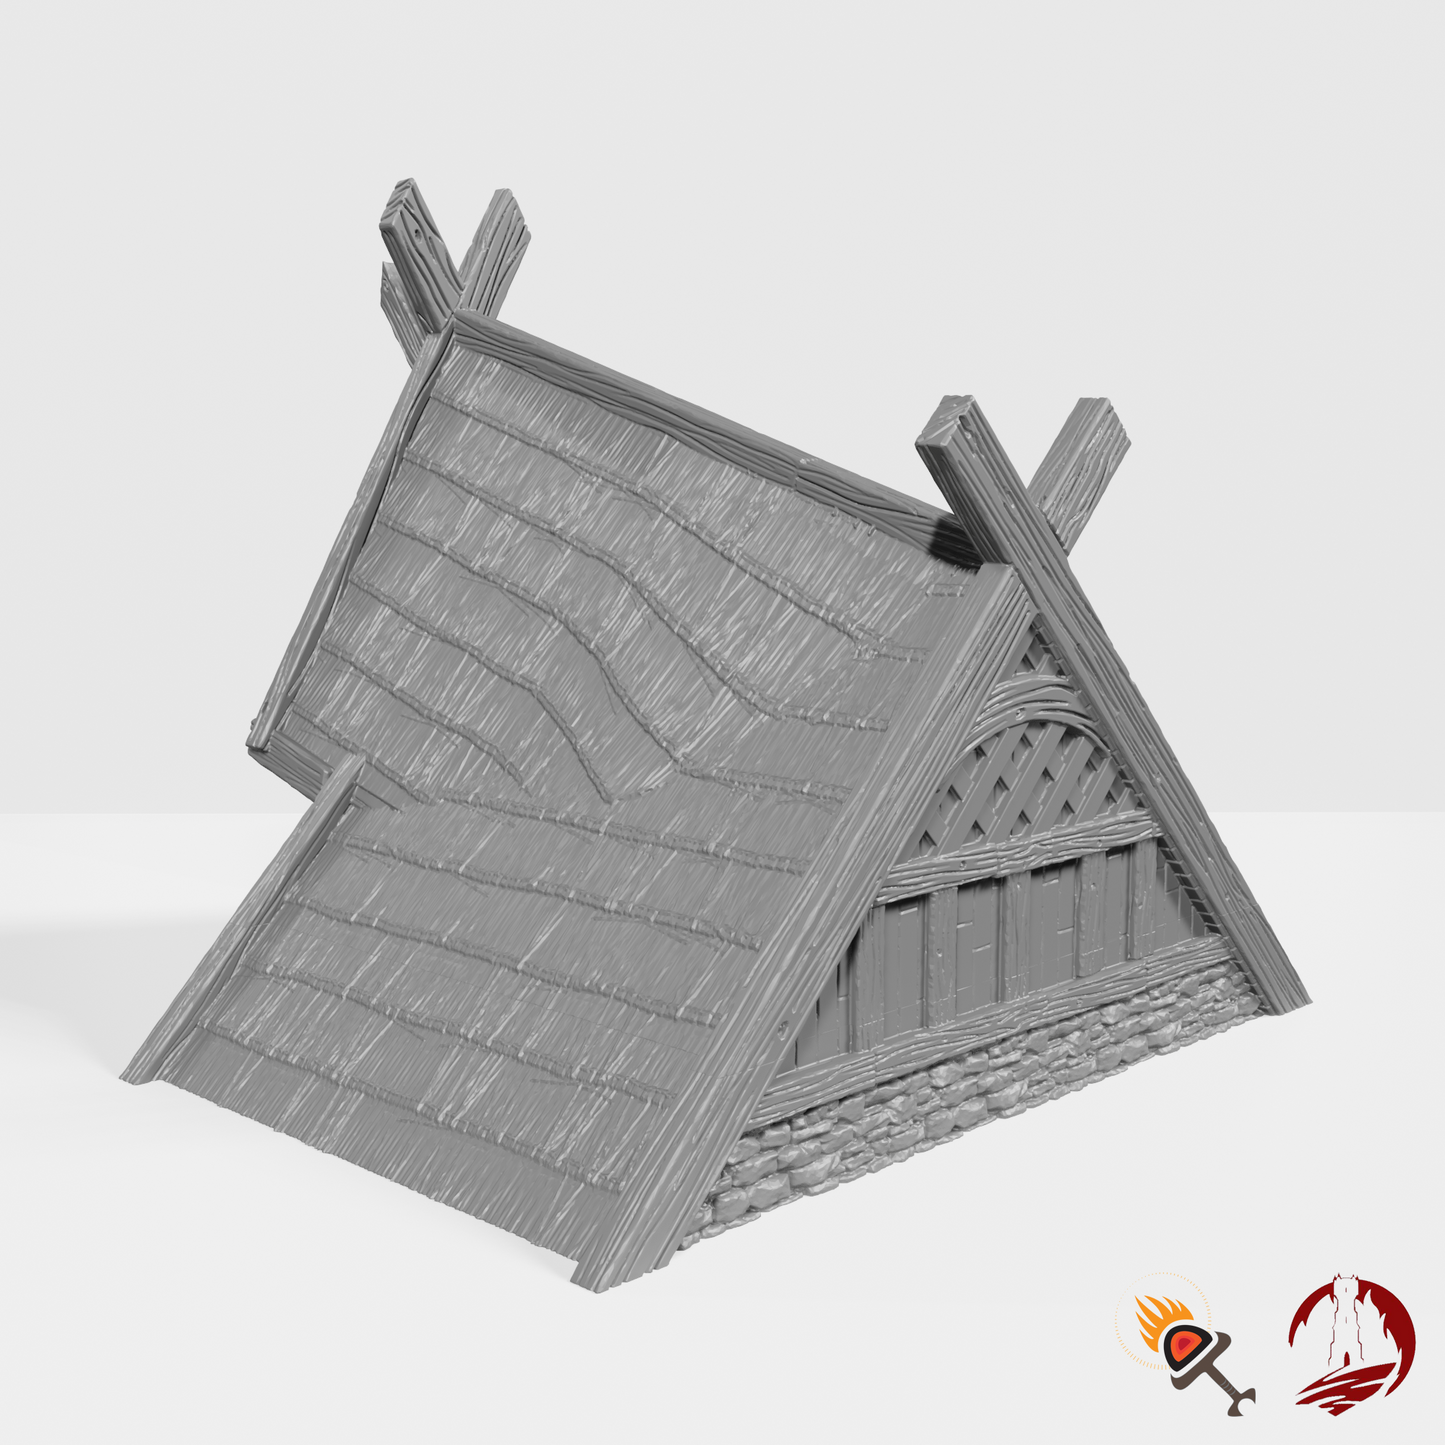 Miniature Viking House 28mm for D&D Terrain, DnD Pathfinder Fantasy Barbarian, Dark Realms Odingard Norse House 3, Gift for Tabletop Gamers